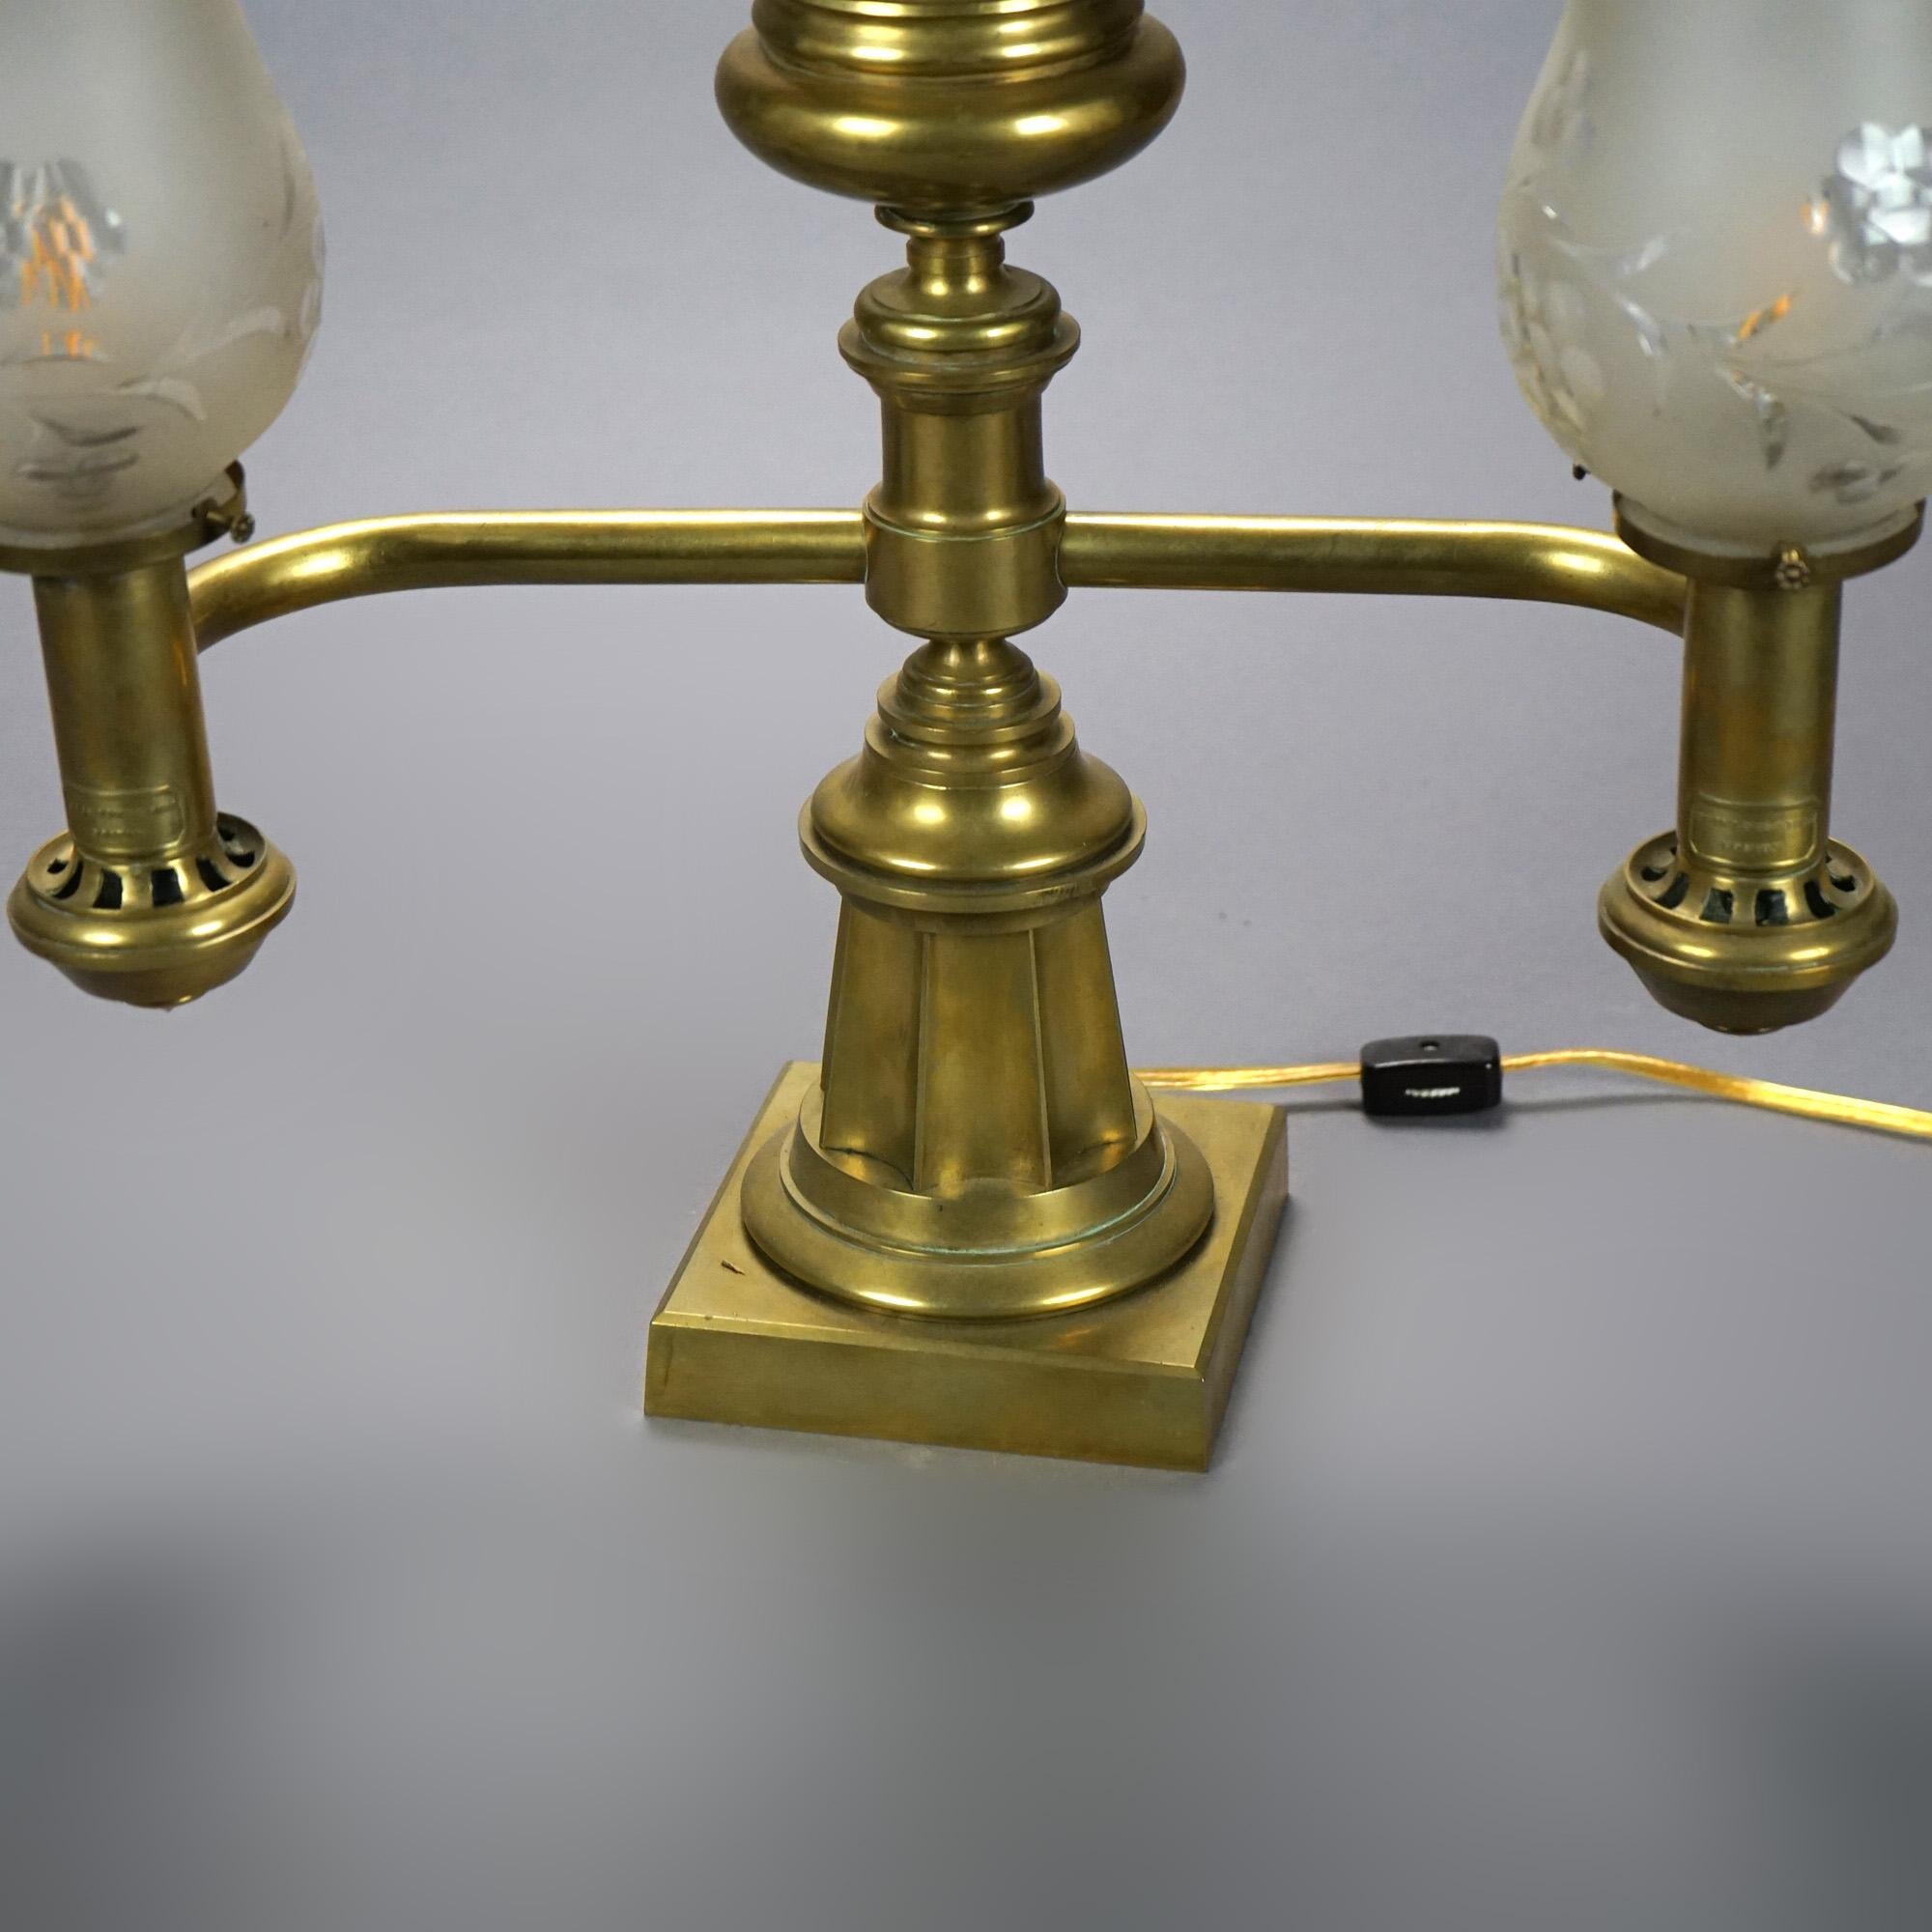 Antique Gilt Brass & Bronze Double Argand Lamp with Shades, circa 1820 For Sale 2